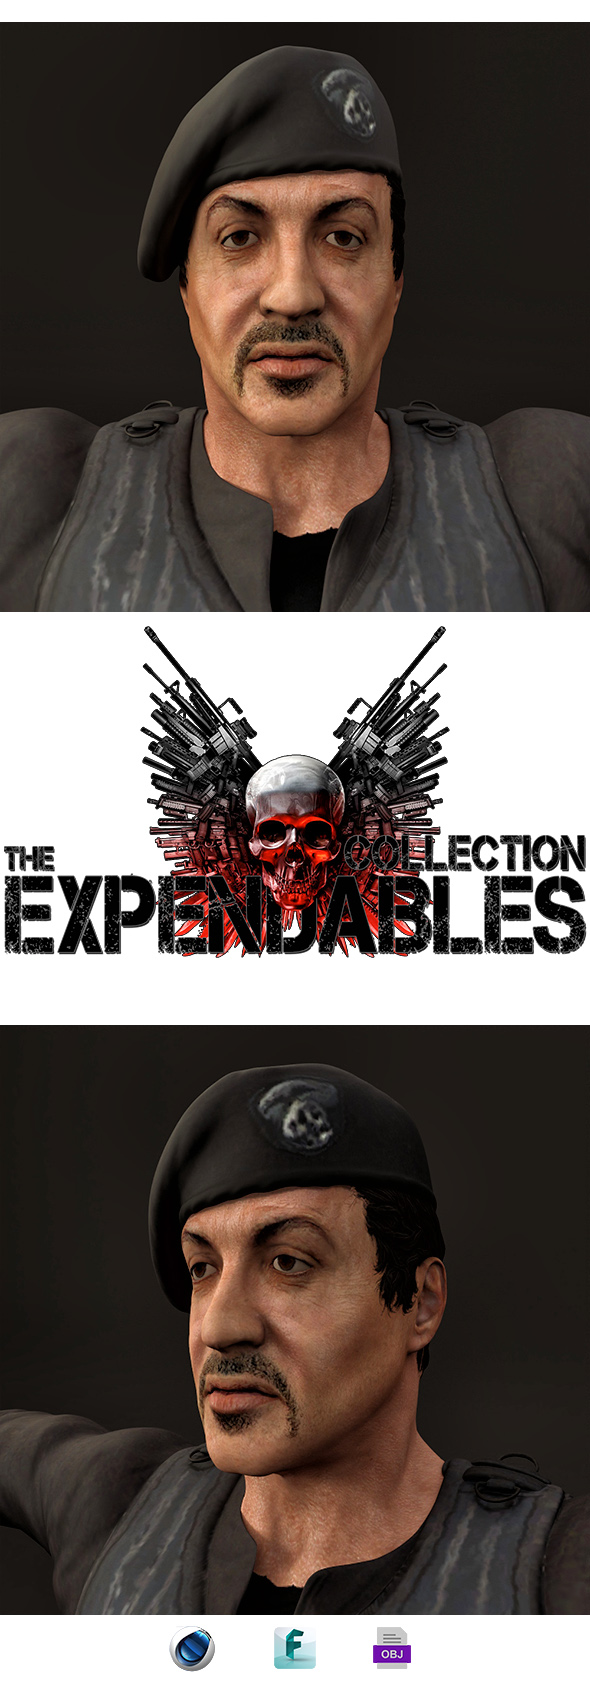 EXPENDABLESBarney Ross 3D - 3Docean 27785913